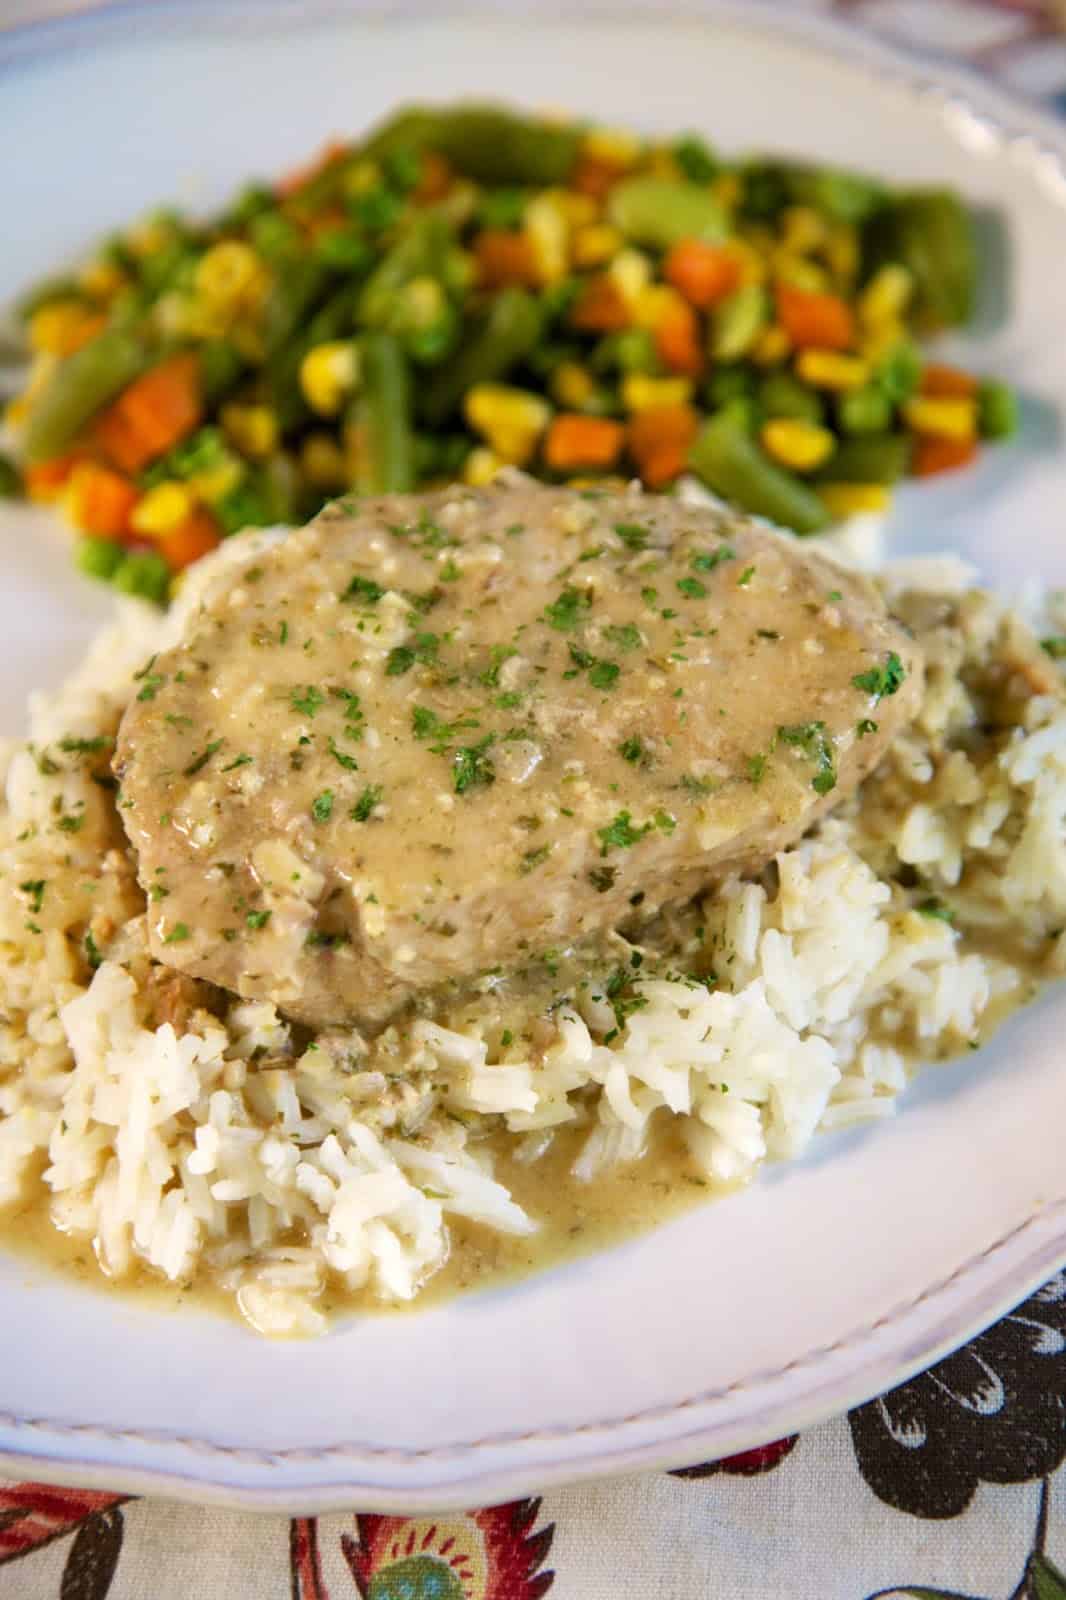 {Freezer Meal} Garlic Parmesan Pork Chops - SO delicious!!! Pork chops slow cooked in garlic seasoning, onion flakes, cream of chicken soup and apple juice. Seriously the most delicious pork chops we've ever eaten!! Can cook frozen in the slow cooker. #porkchops #slowcooker #freezermeal